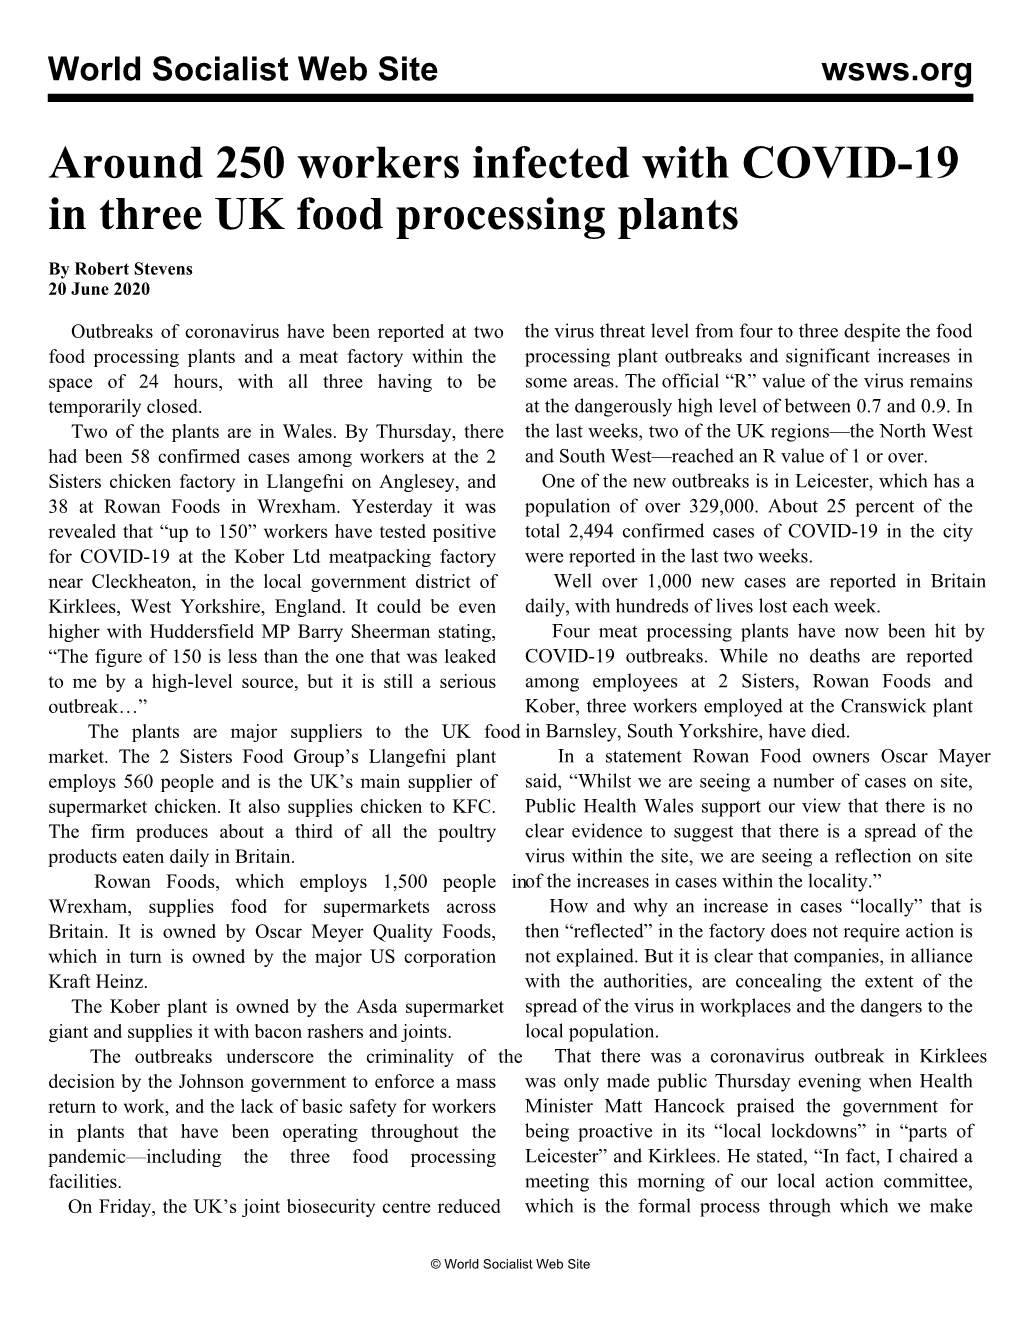 Around 250 Workers Infected with COVID-19 in Three UK Food Processing Plants